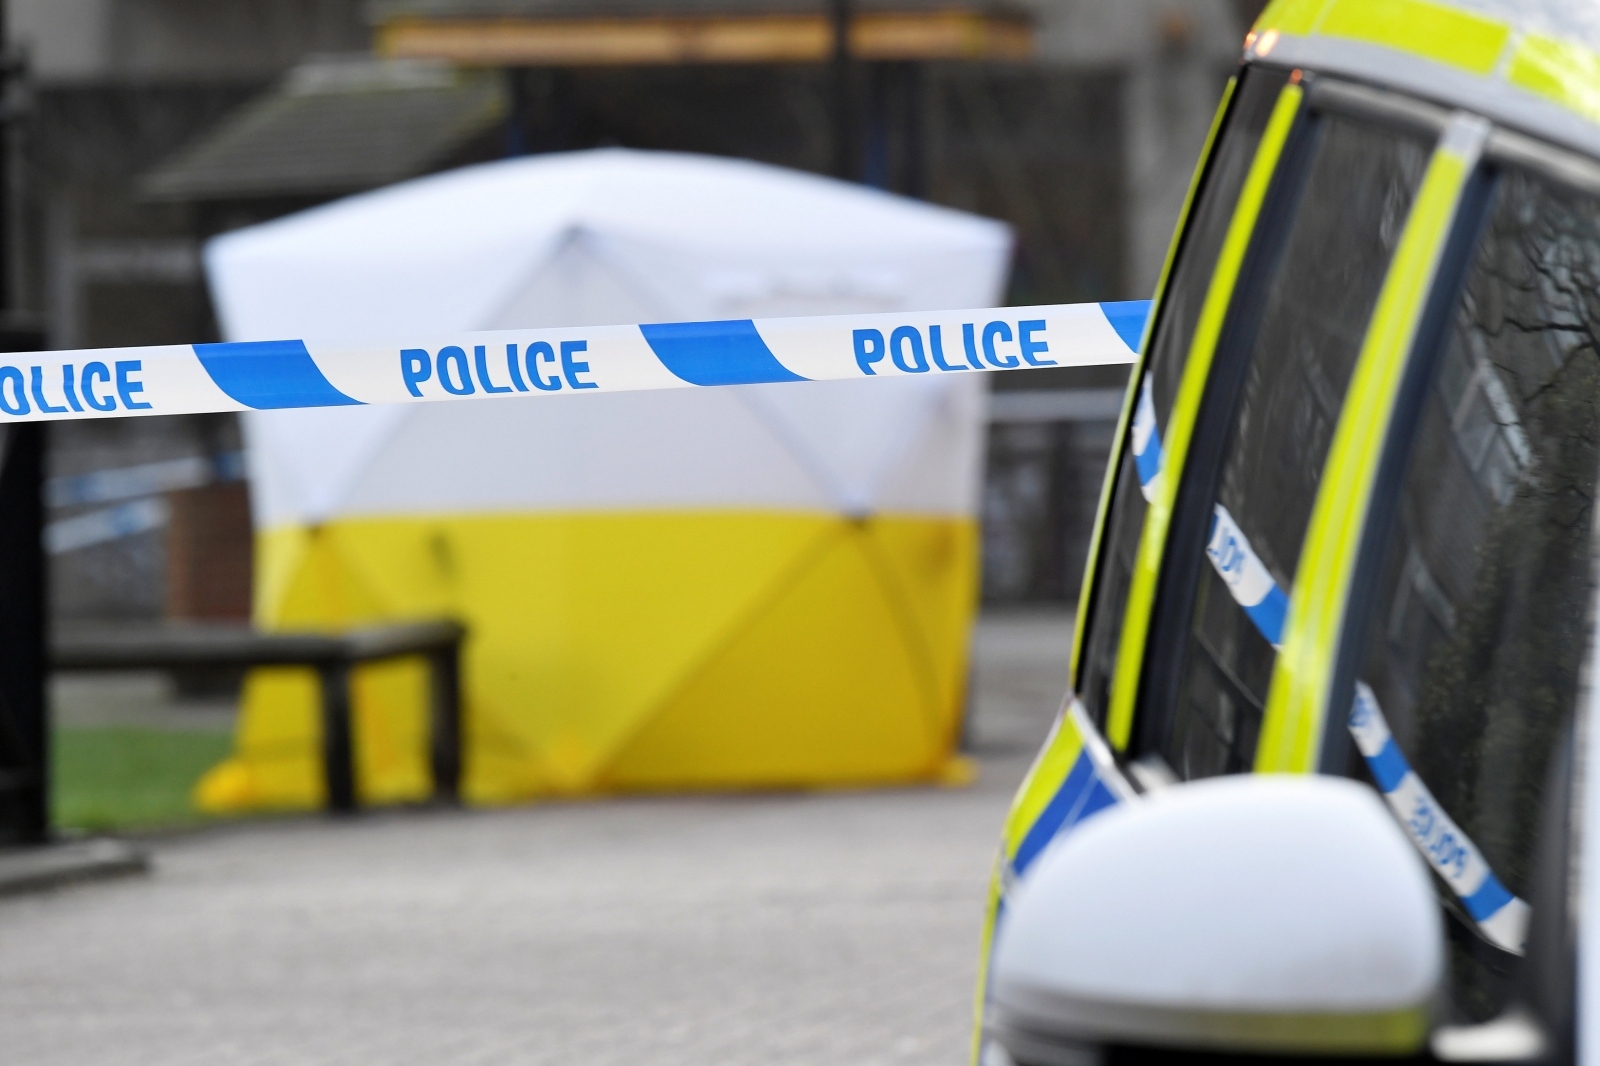 FILE PHOTO: A police car is parked next to crime scene tape, as a tent covers a park bench on which former Russian inteligence officer Sergei Skripal, and a woman were found unconscious after they had been exposed to an unknown substance, in Salisbury FILE PHOTO: A police car is parked next to crime scene tape, as a tent covers a park bench on which former Russian inteligence officer Sergei Skripal was found unconscious in Salisbury, Britain, March 6, 2018. REUTERS/Toby Melville/File Photo Toby Melville